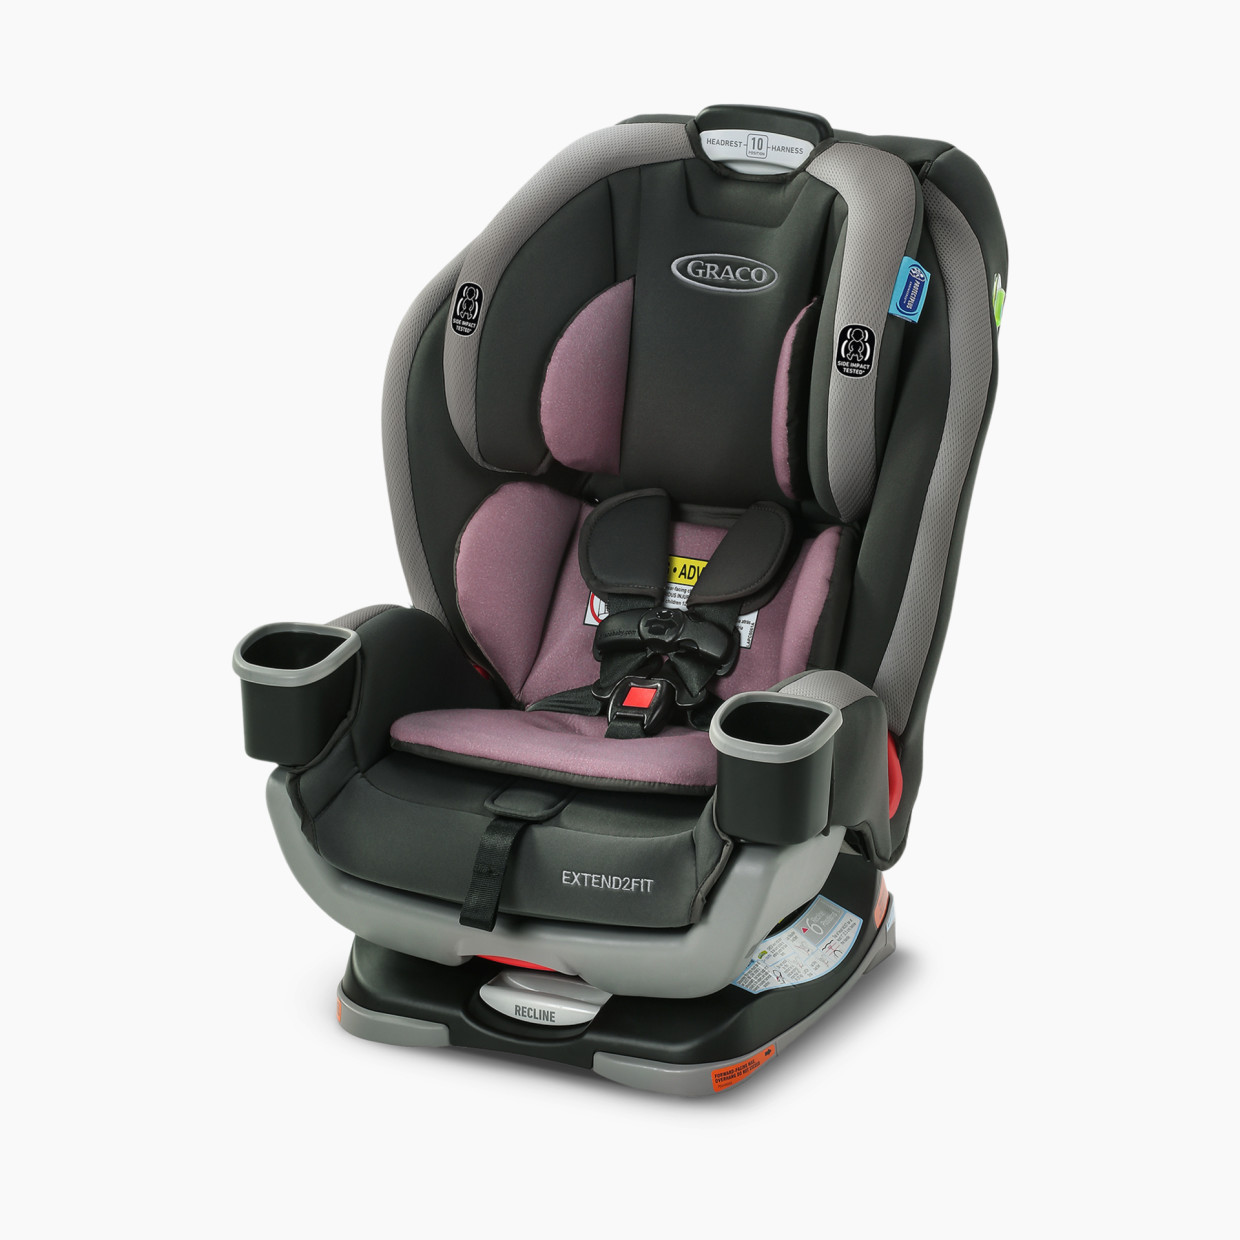 Graco Extend2Fit 3-in-1 Car Seat - Norah.